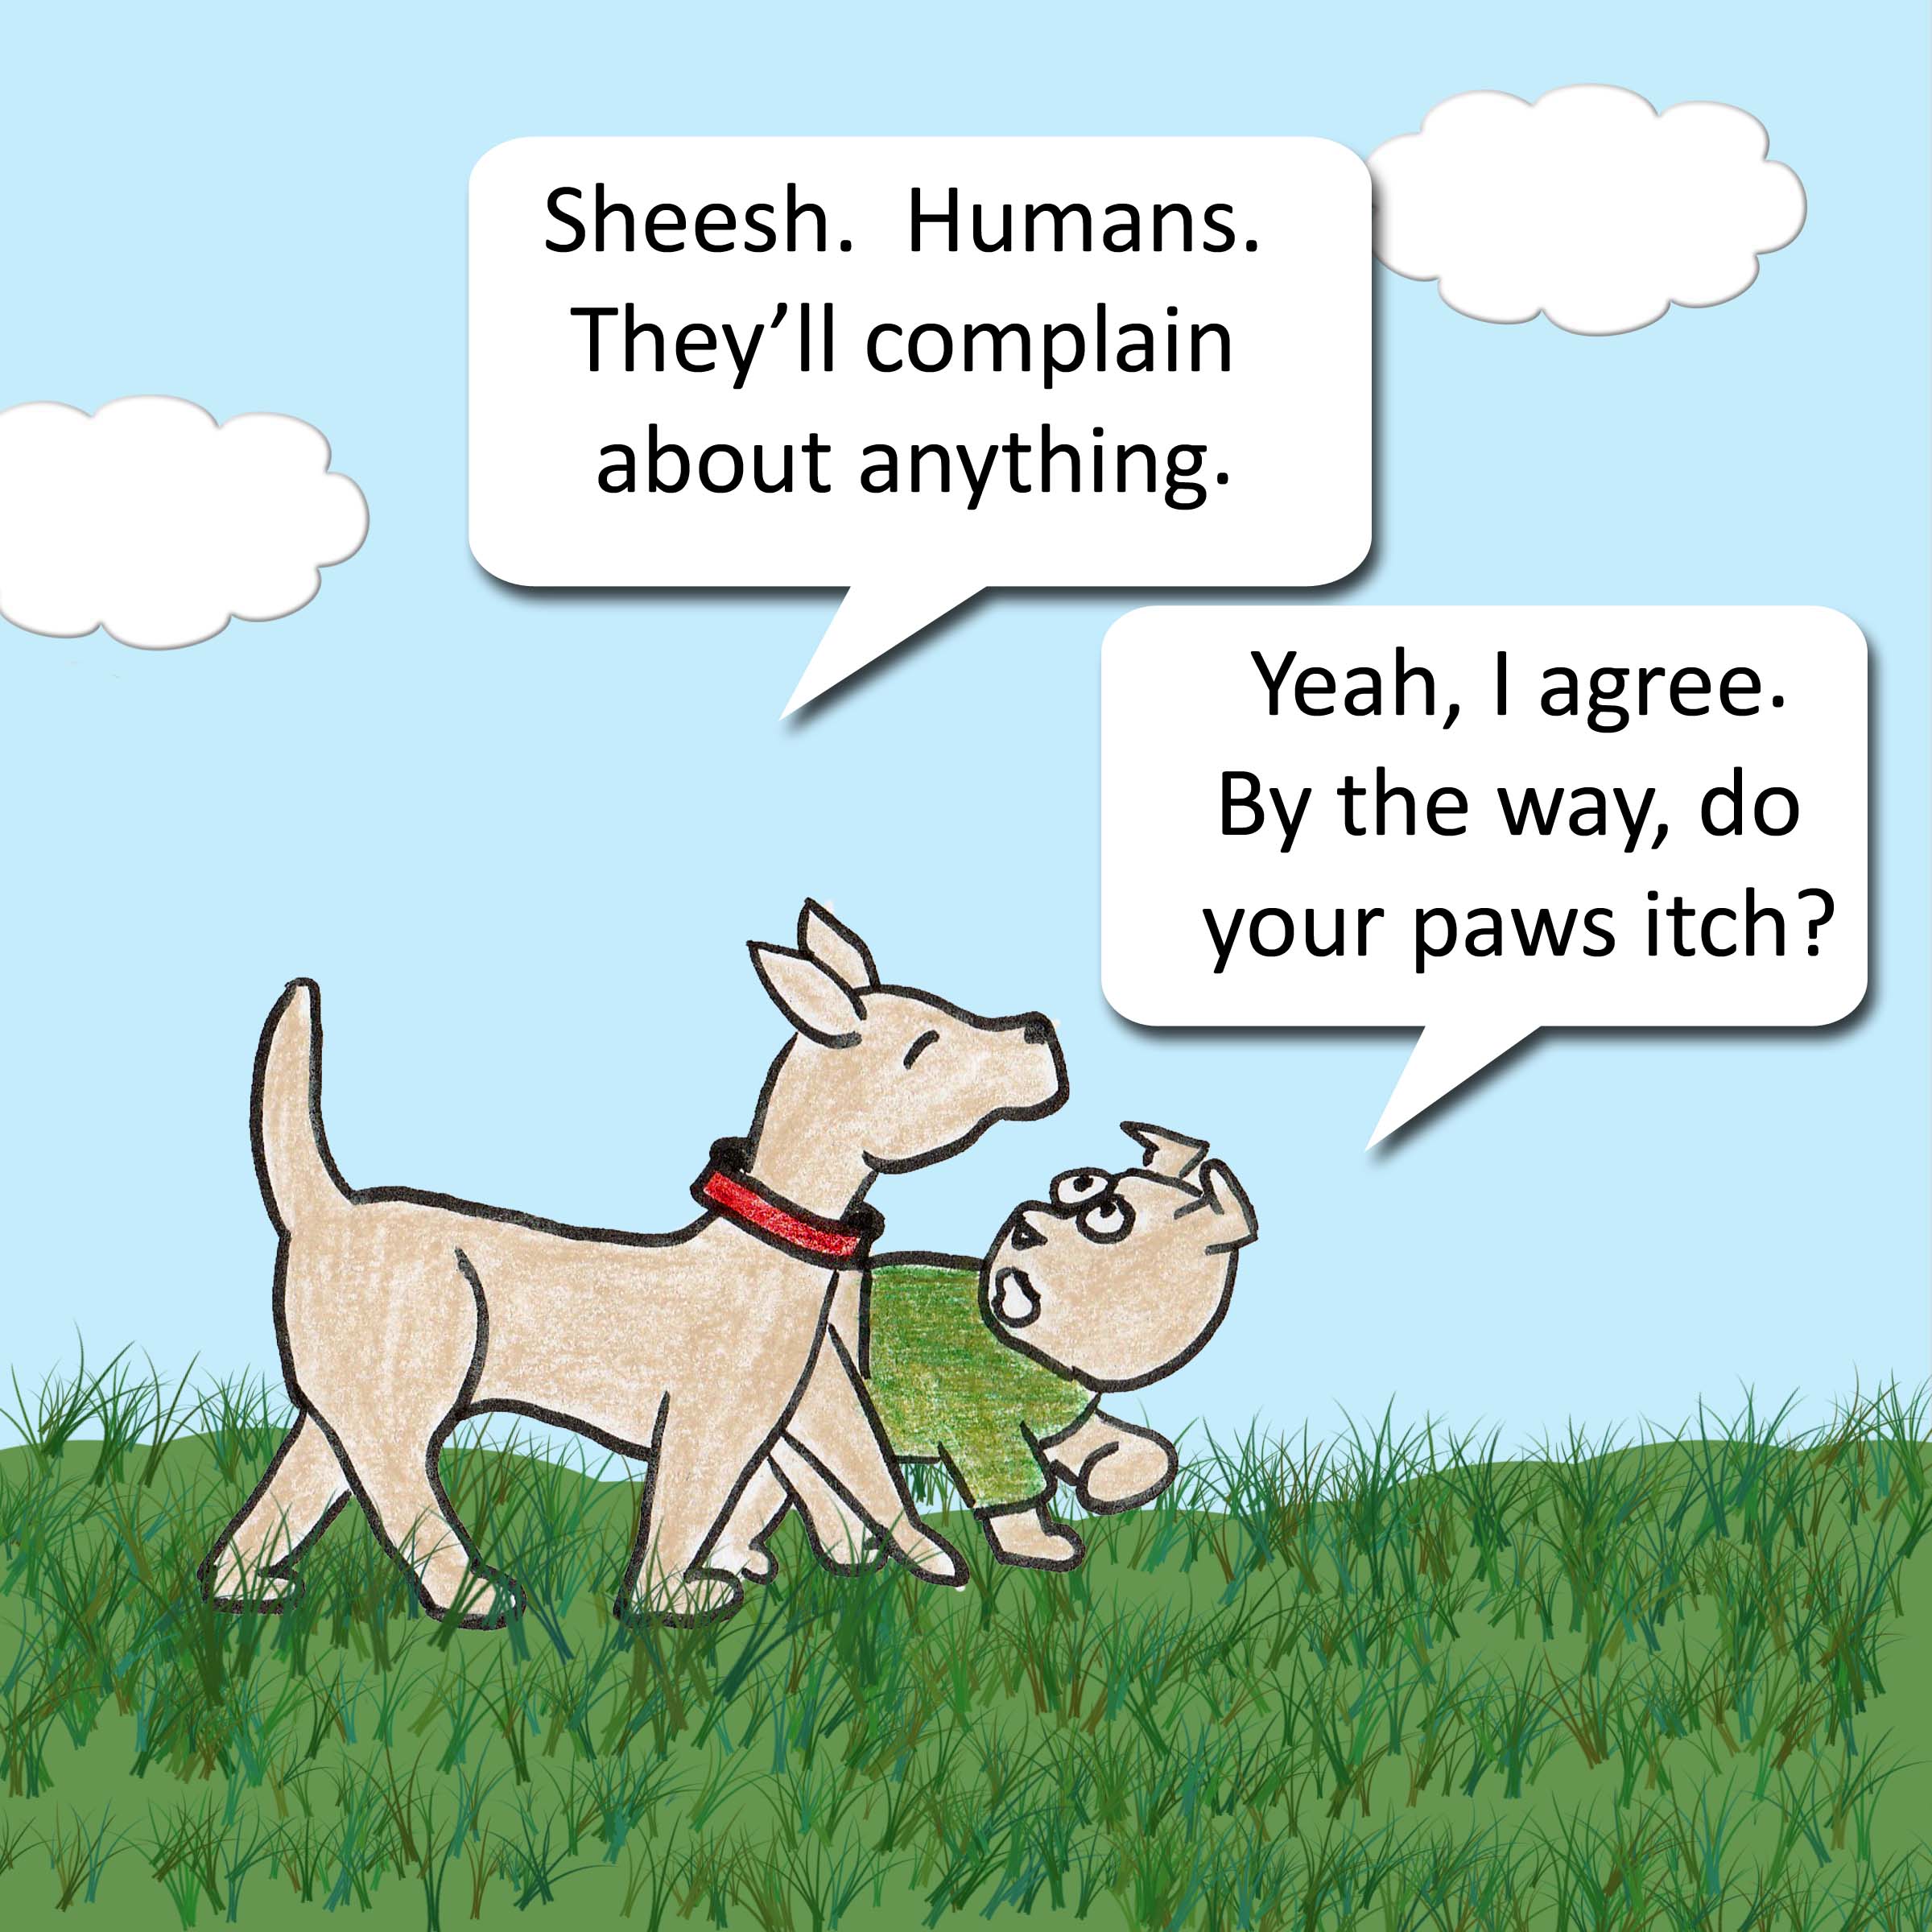 Sheesh. Humans. They'll complain about anything. Yeah, I agree. By the way, do your paws itch?